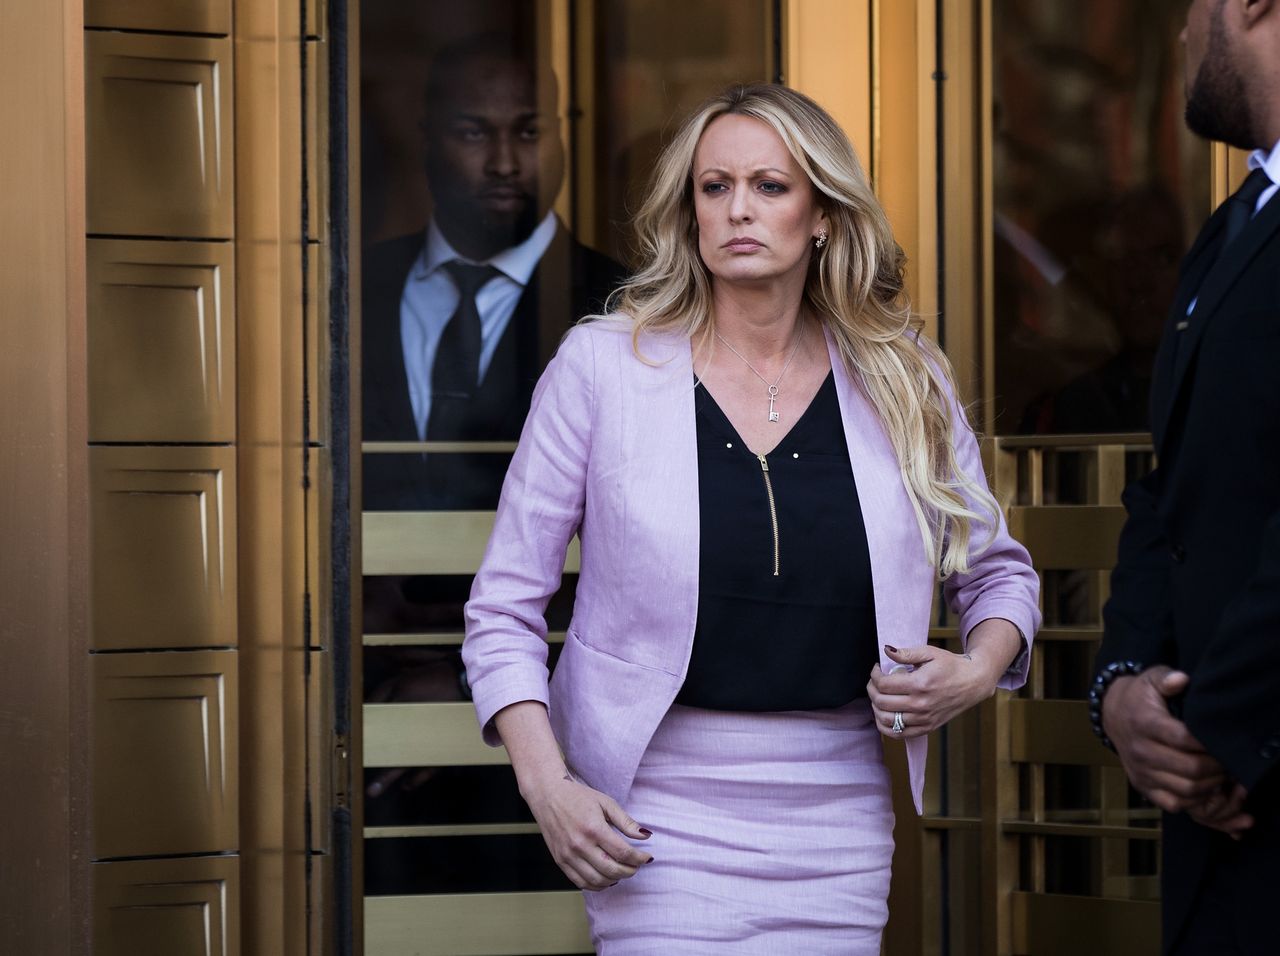 Stormy Daniels reached out to Melania Trump